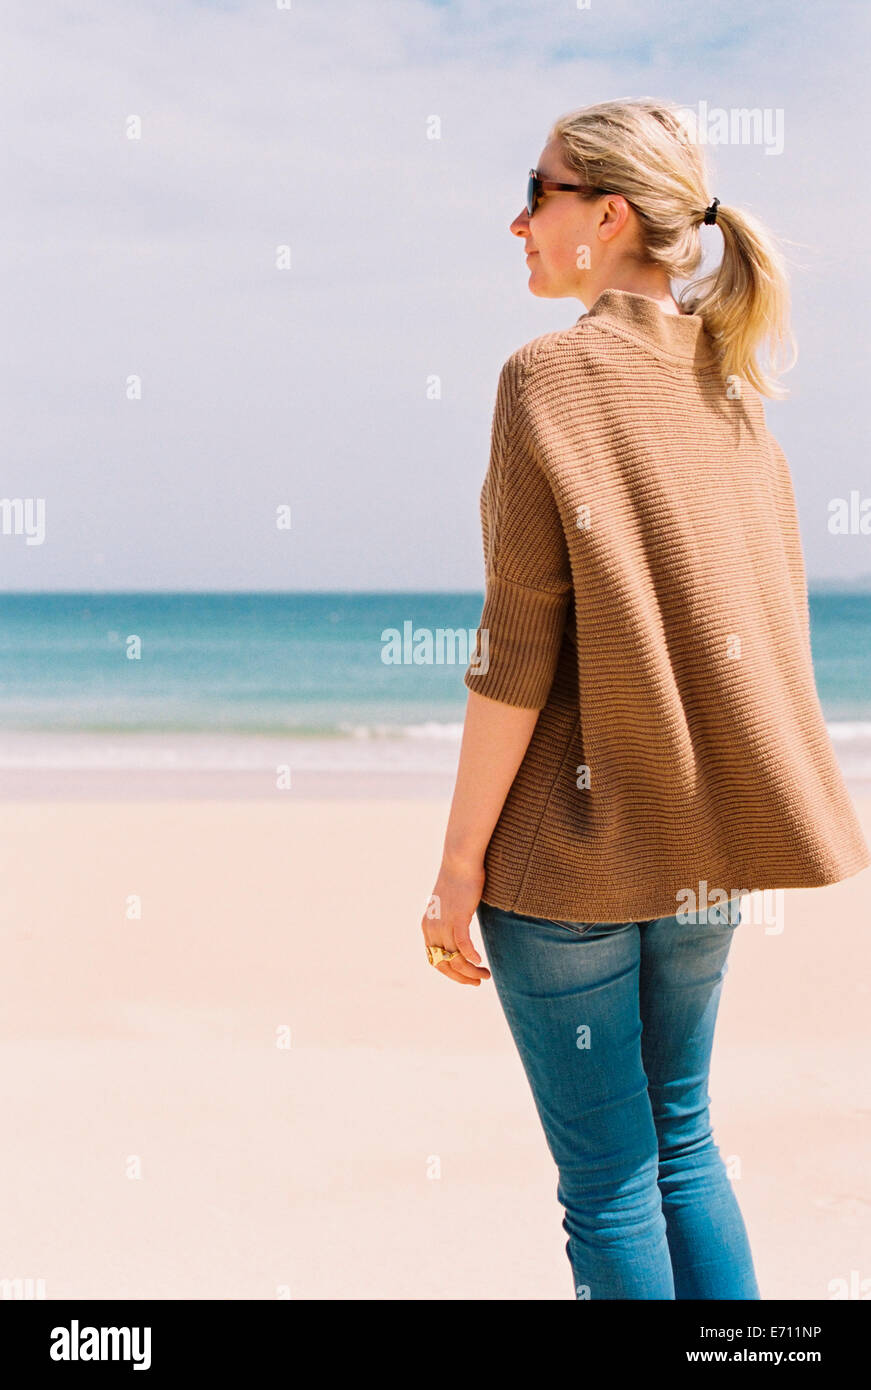 A woman in a brown jacket standing on the beach looking out to sea. Stock Photo